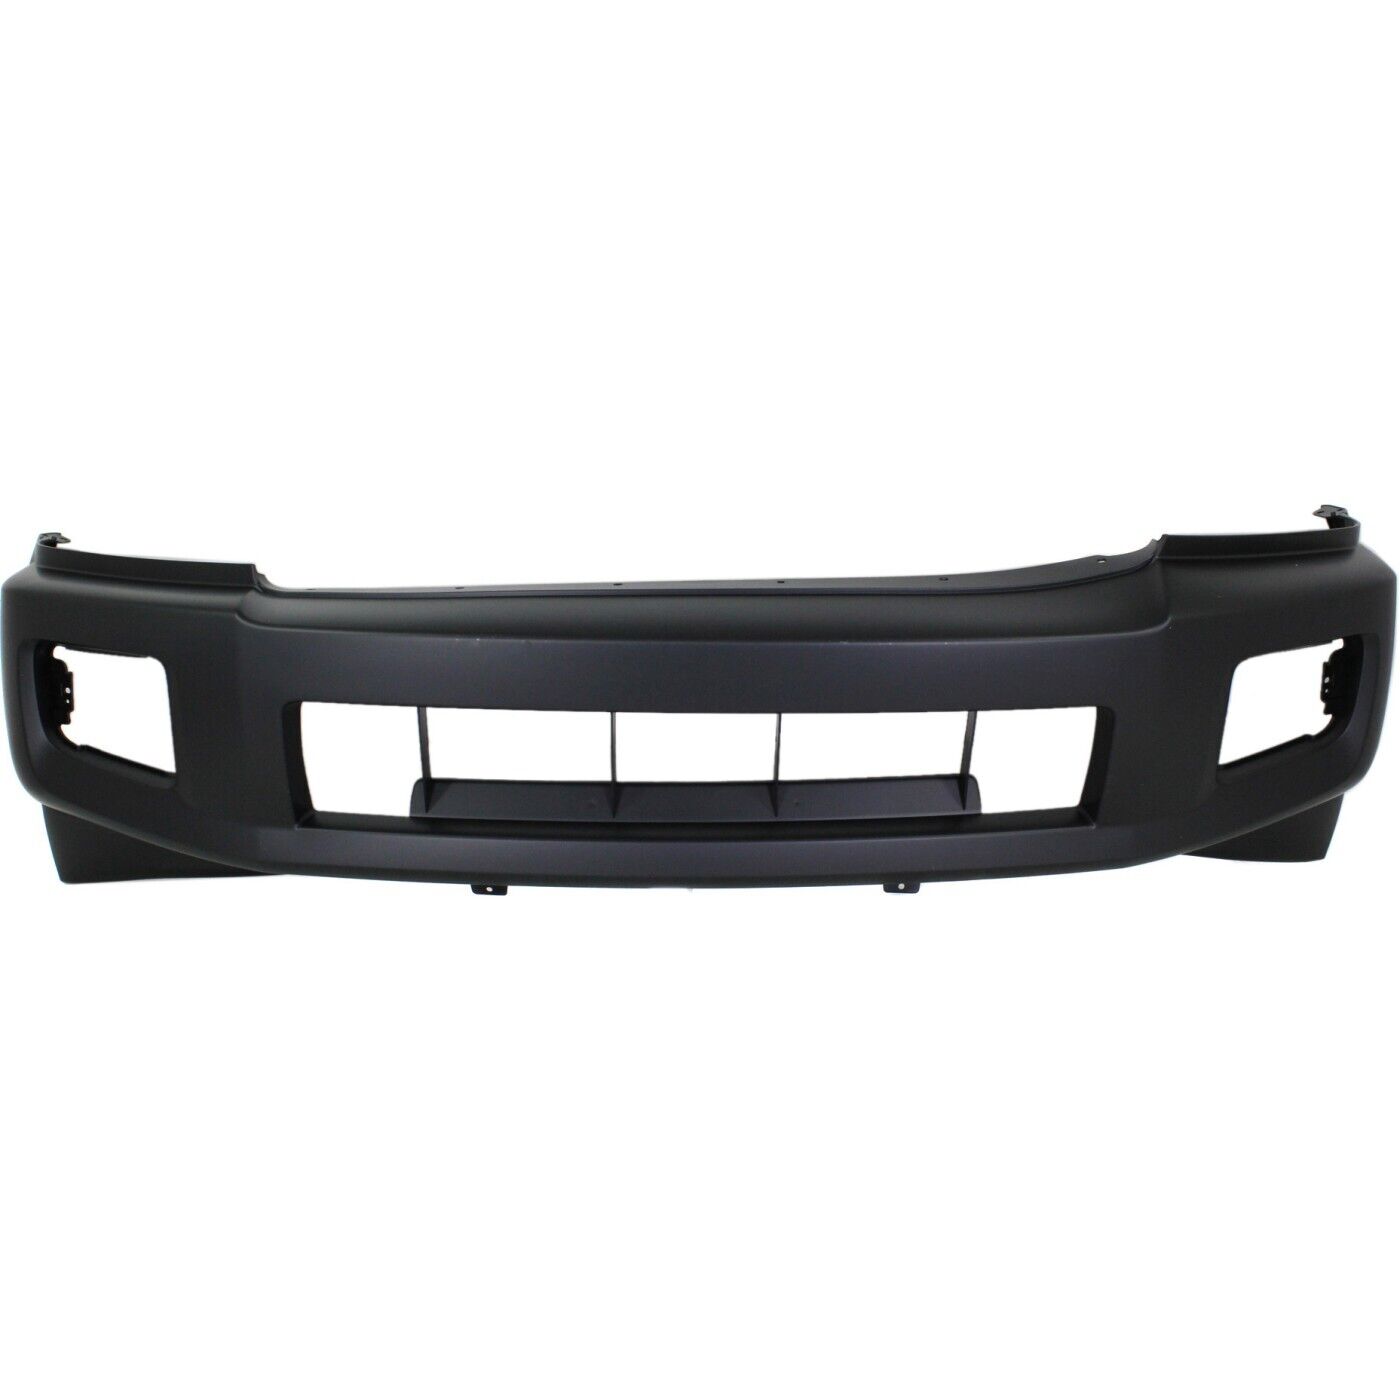 Front Bumper Cover For 2004-2010 Infiniti QX56 With Fog Lamp Holes Primed